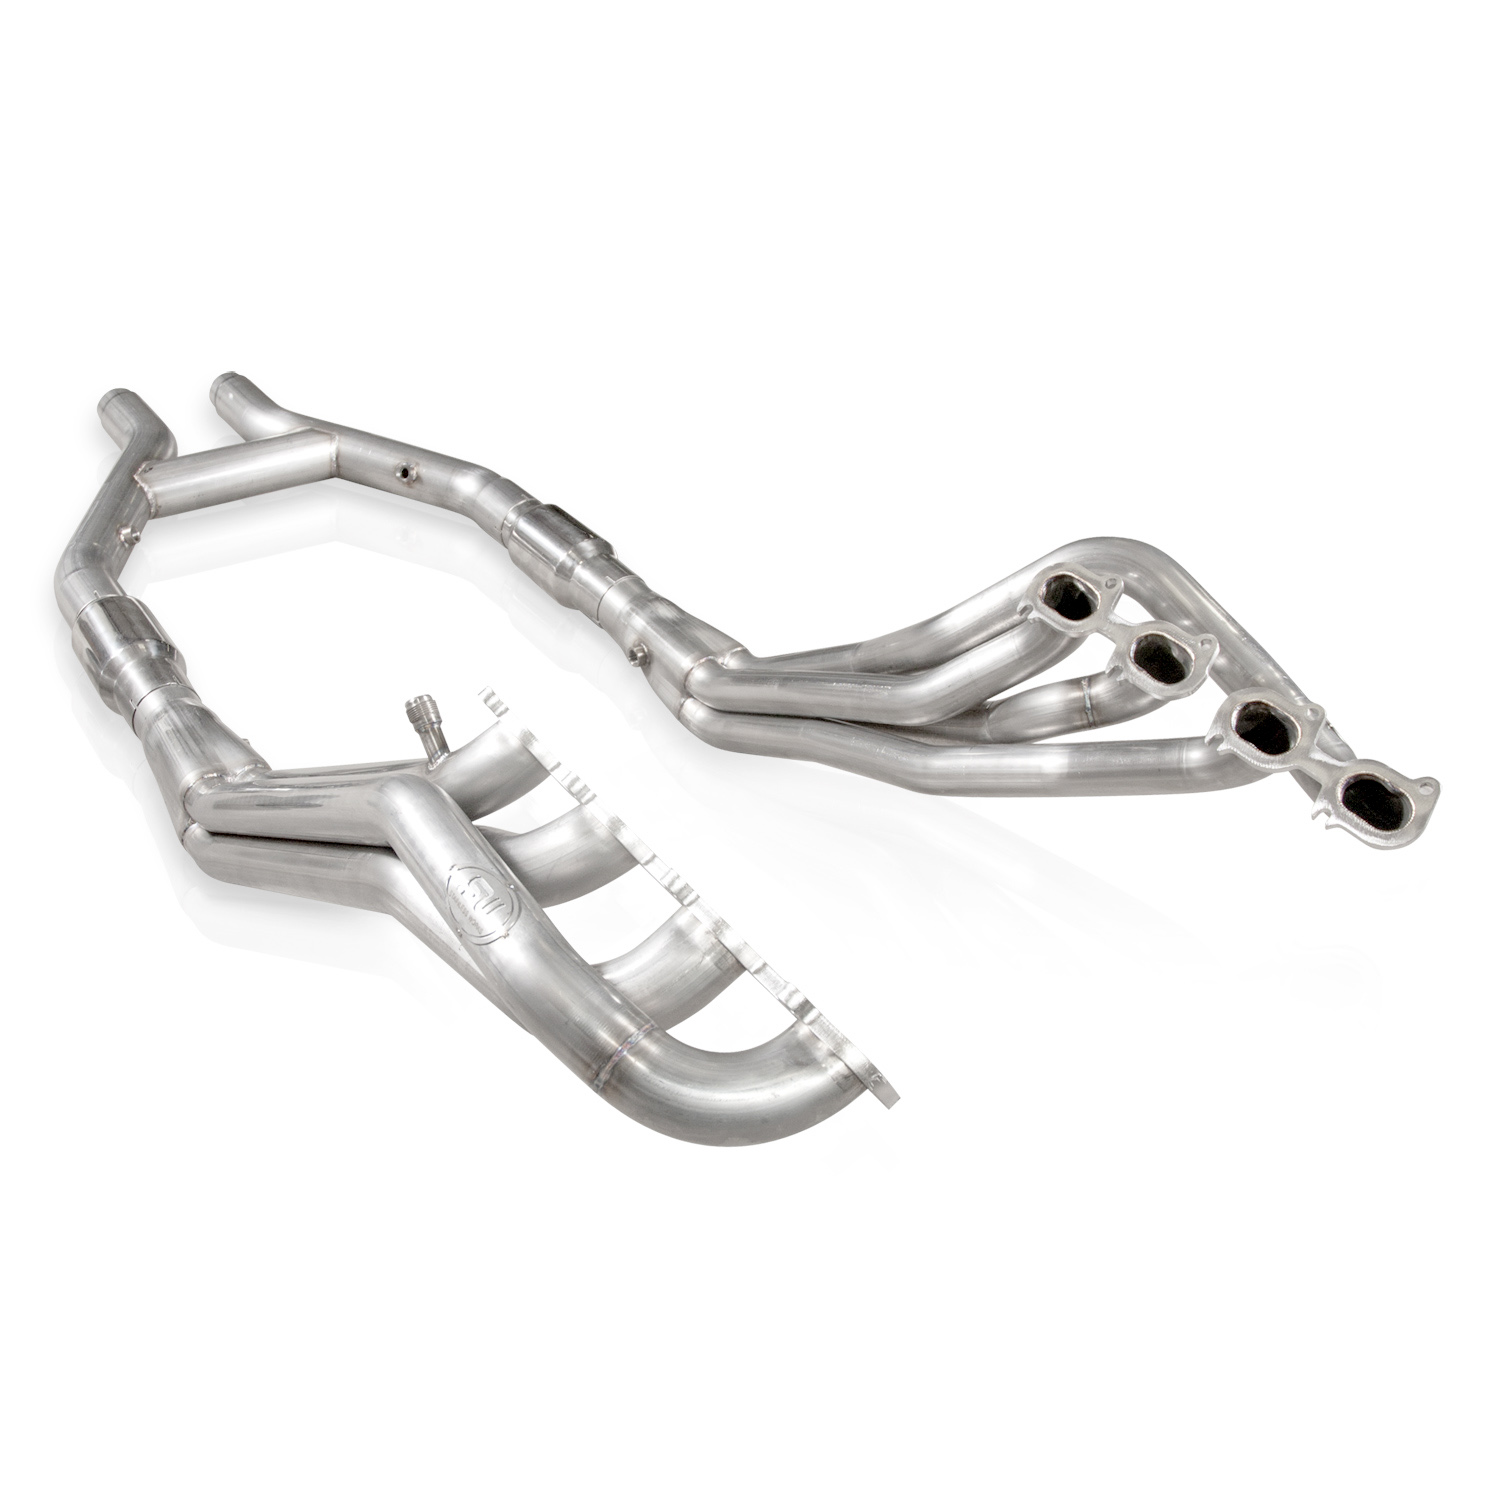 2011-2014 Mustang Shelby GT500 5.4L, 5.8L SW Headers 1-7/8" With Catted Leads Factory & Performance Connect